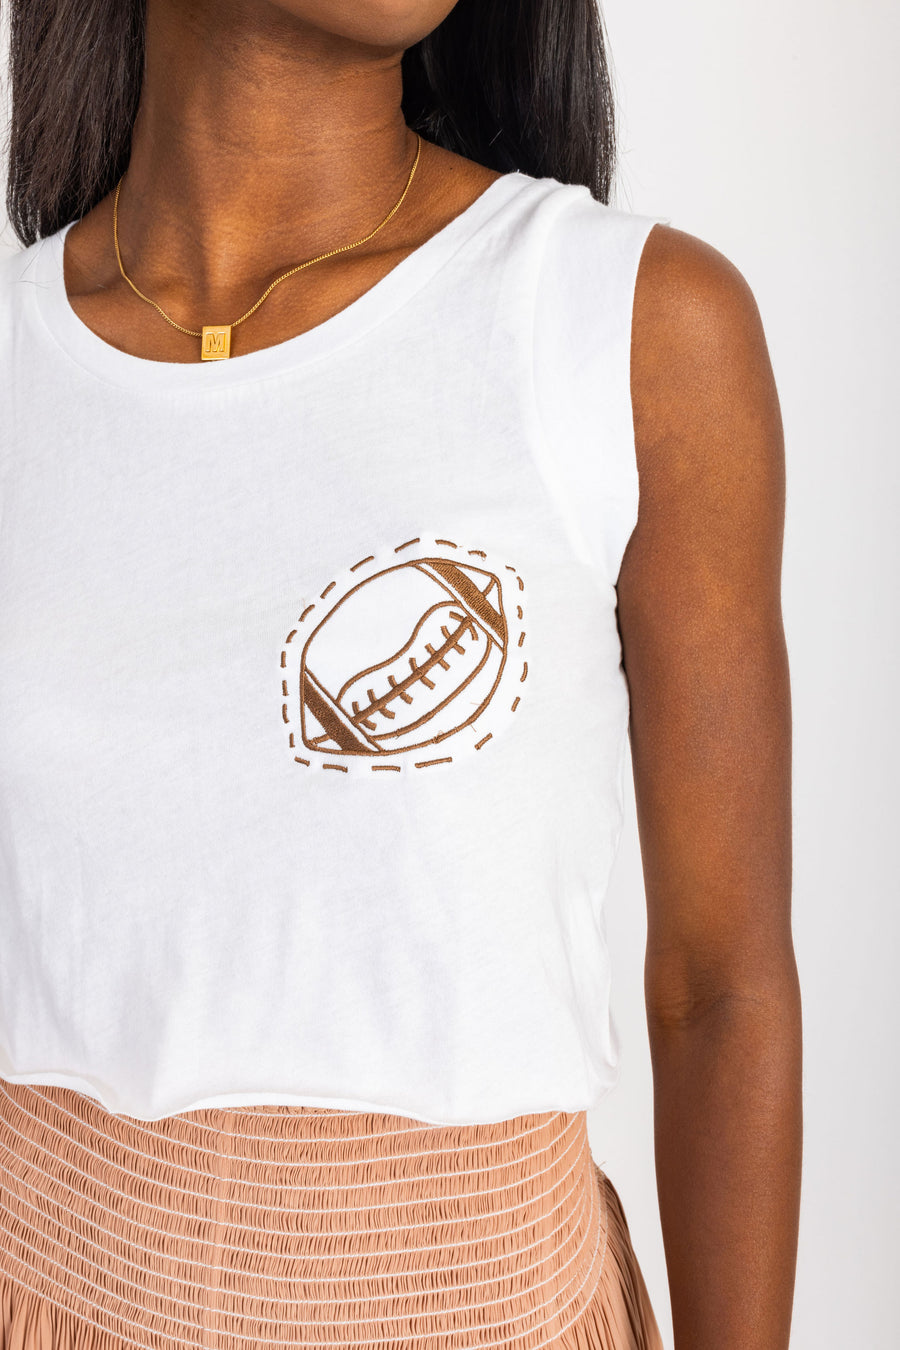 Ava Tee Football Embroidery *Limited*Edition*